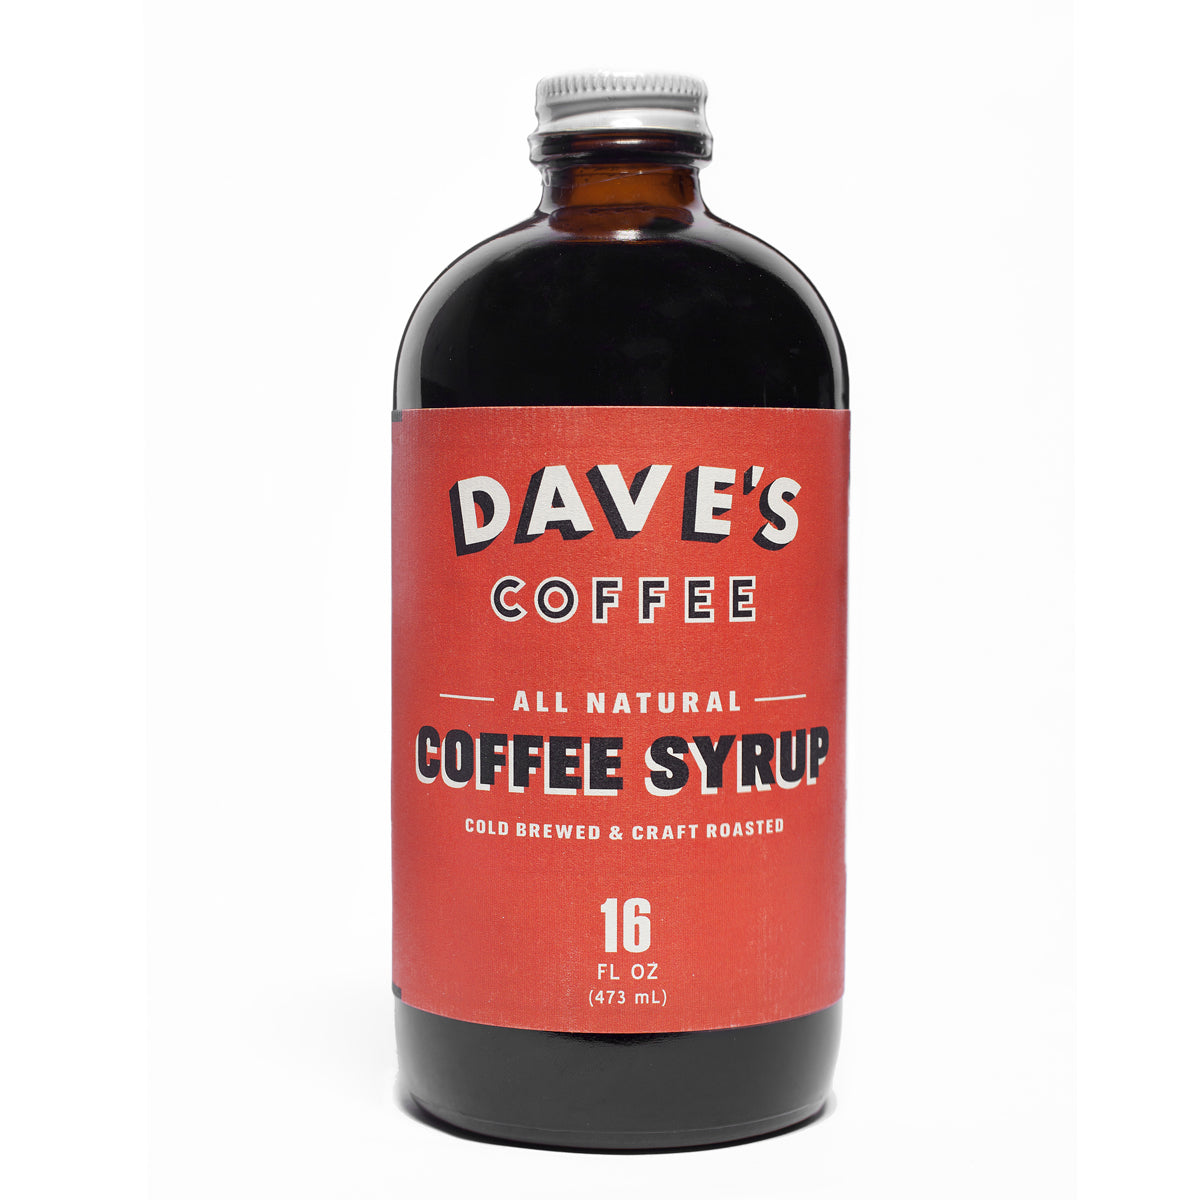 All Natural Coffee Syrup